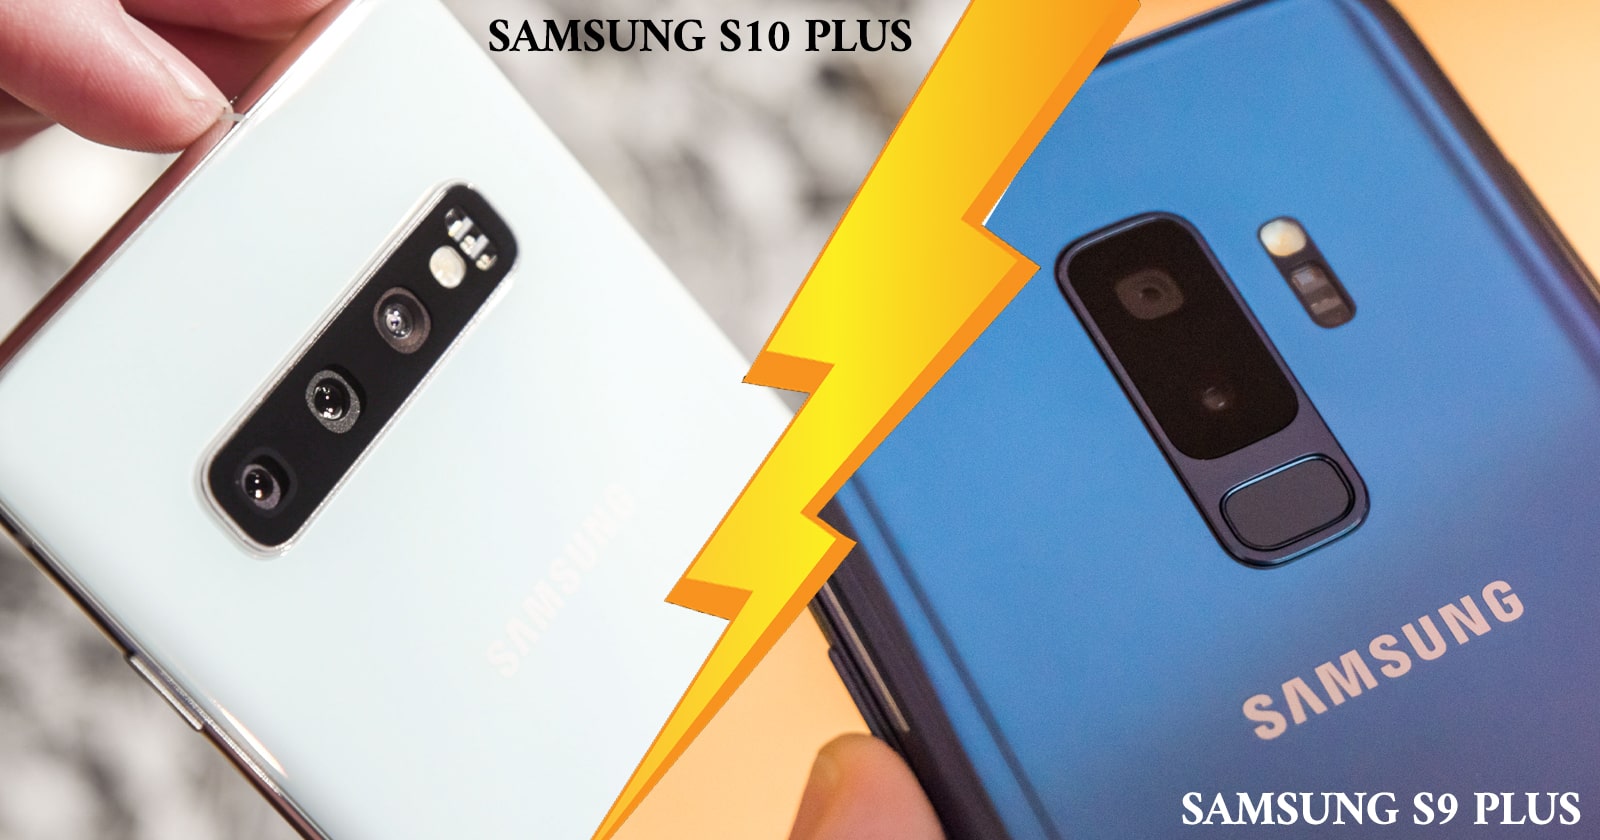 What Is the Difference Between Samsung S9 Plus and S10 Plus